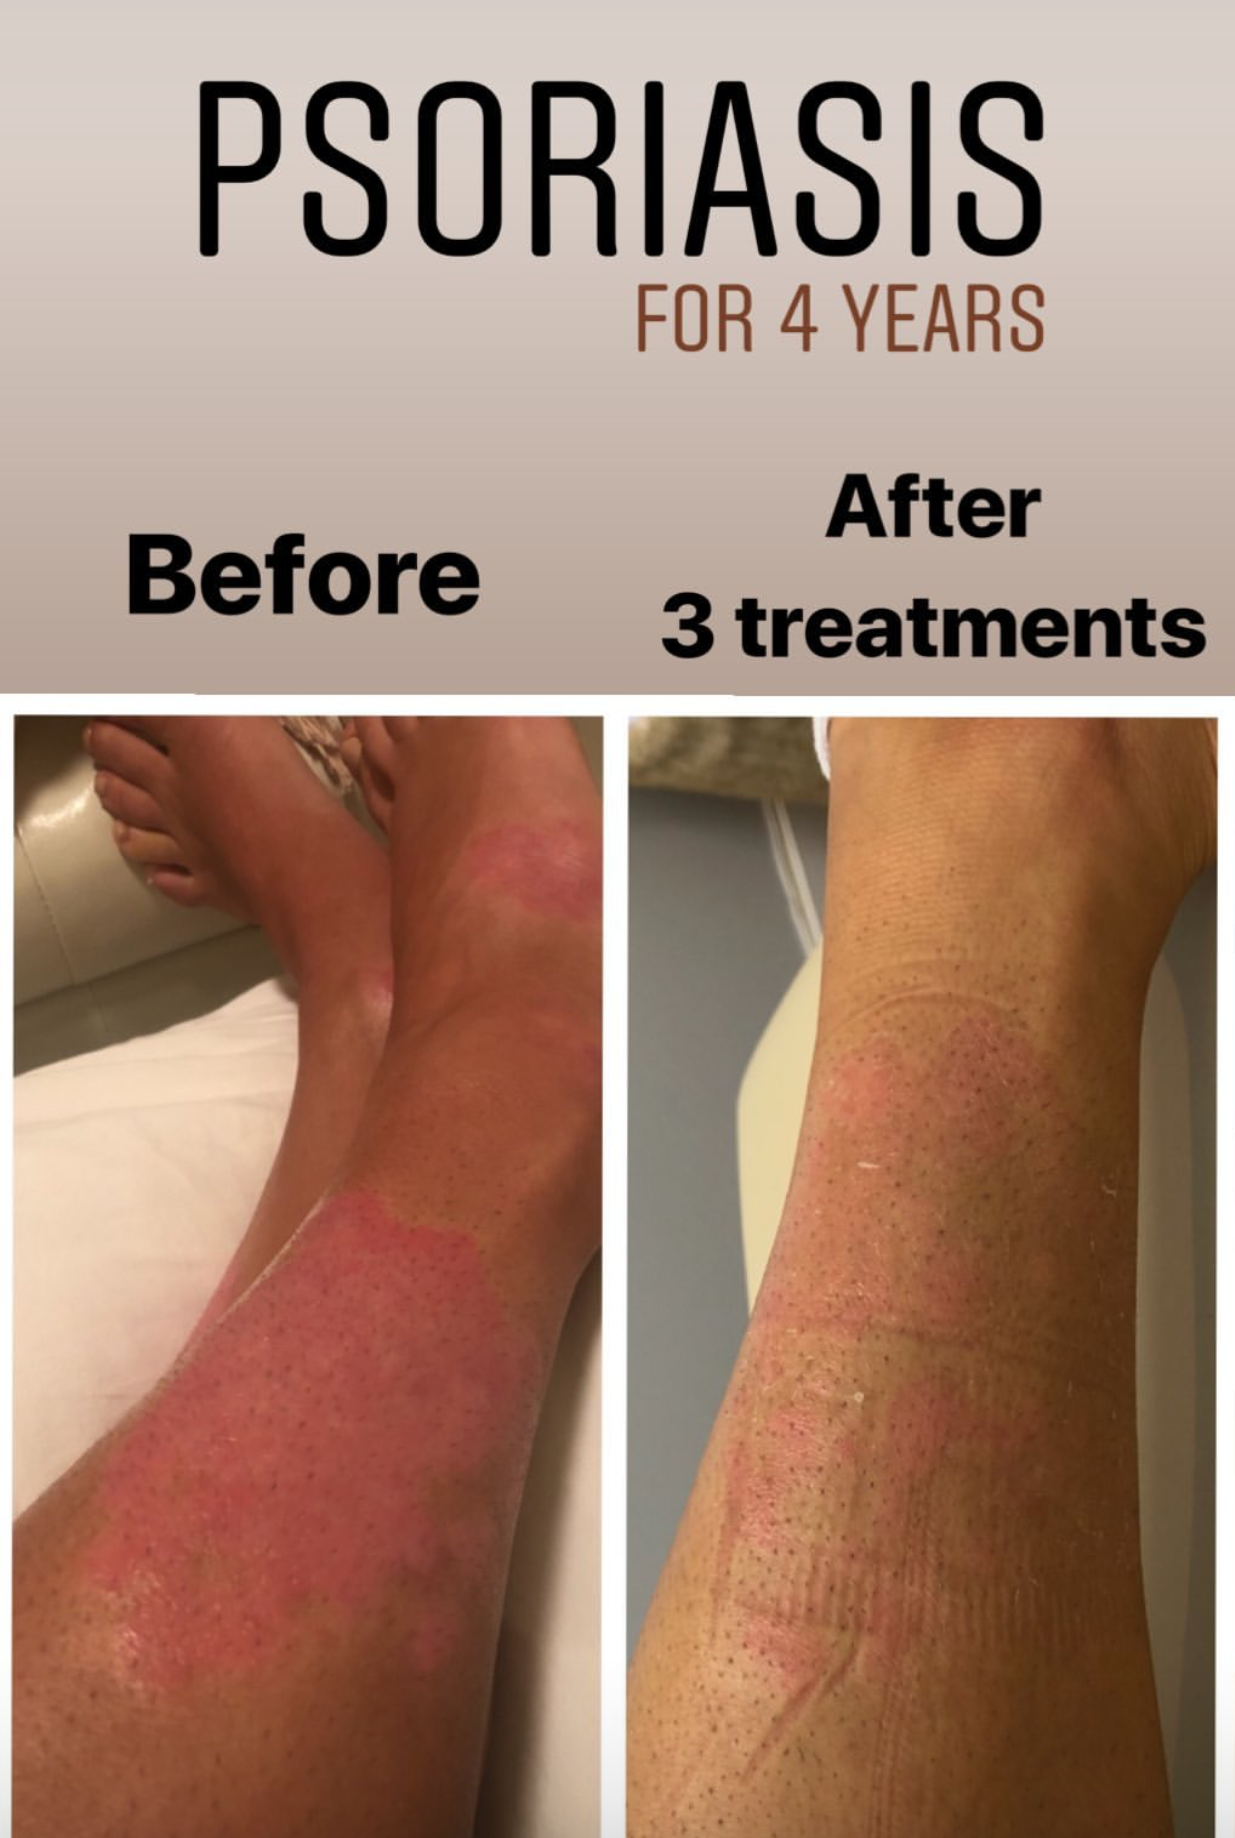  SuJok acupuncture in Vancouver used as treatment for patient suffering from skin condition, Psoriasis. Treatment resulted in reduced redness in affected areas of the skin 